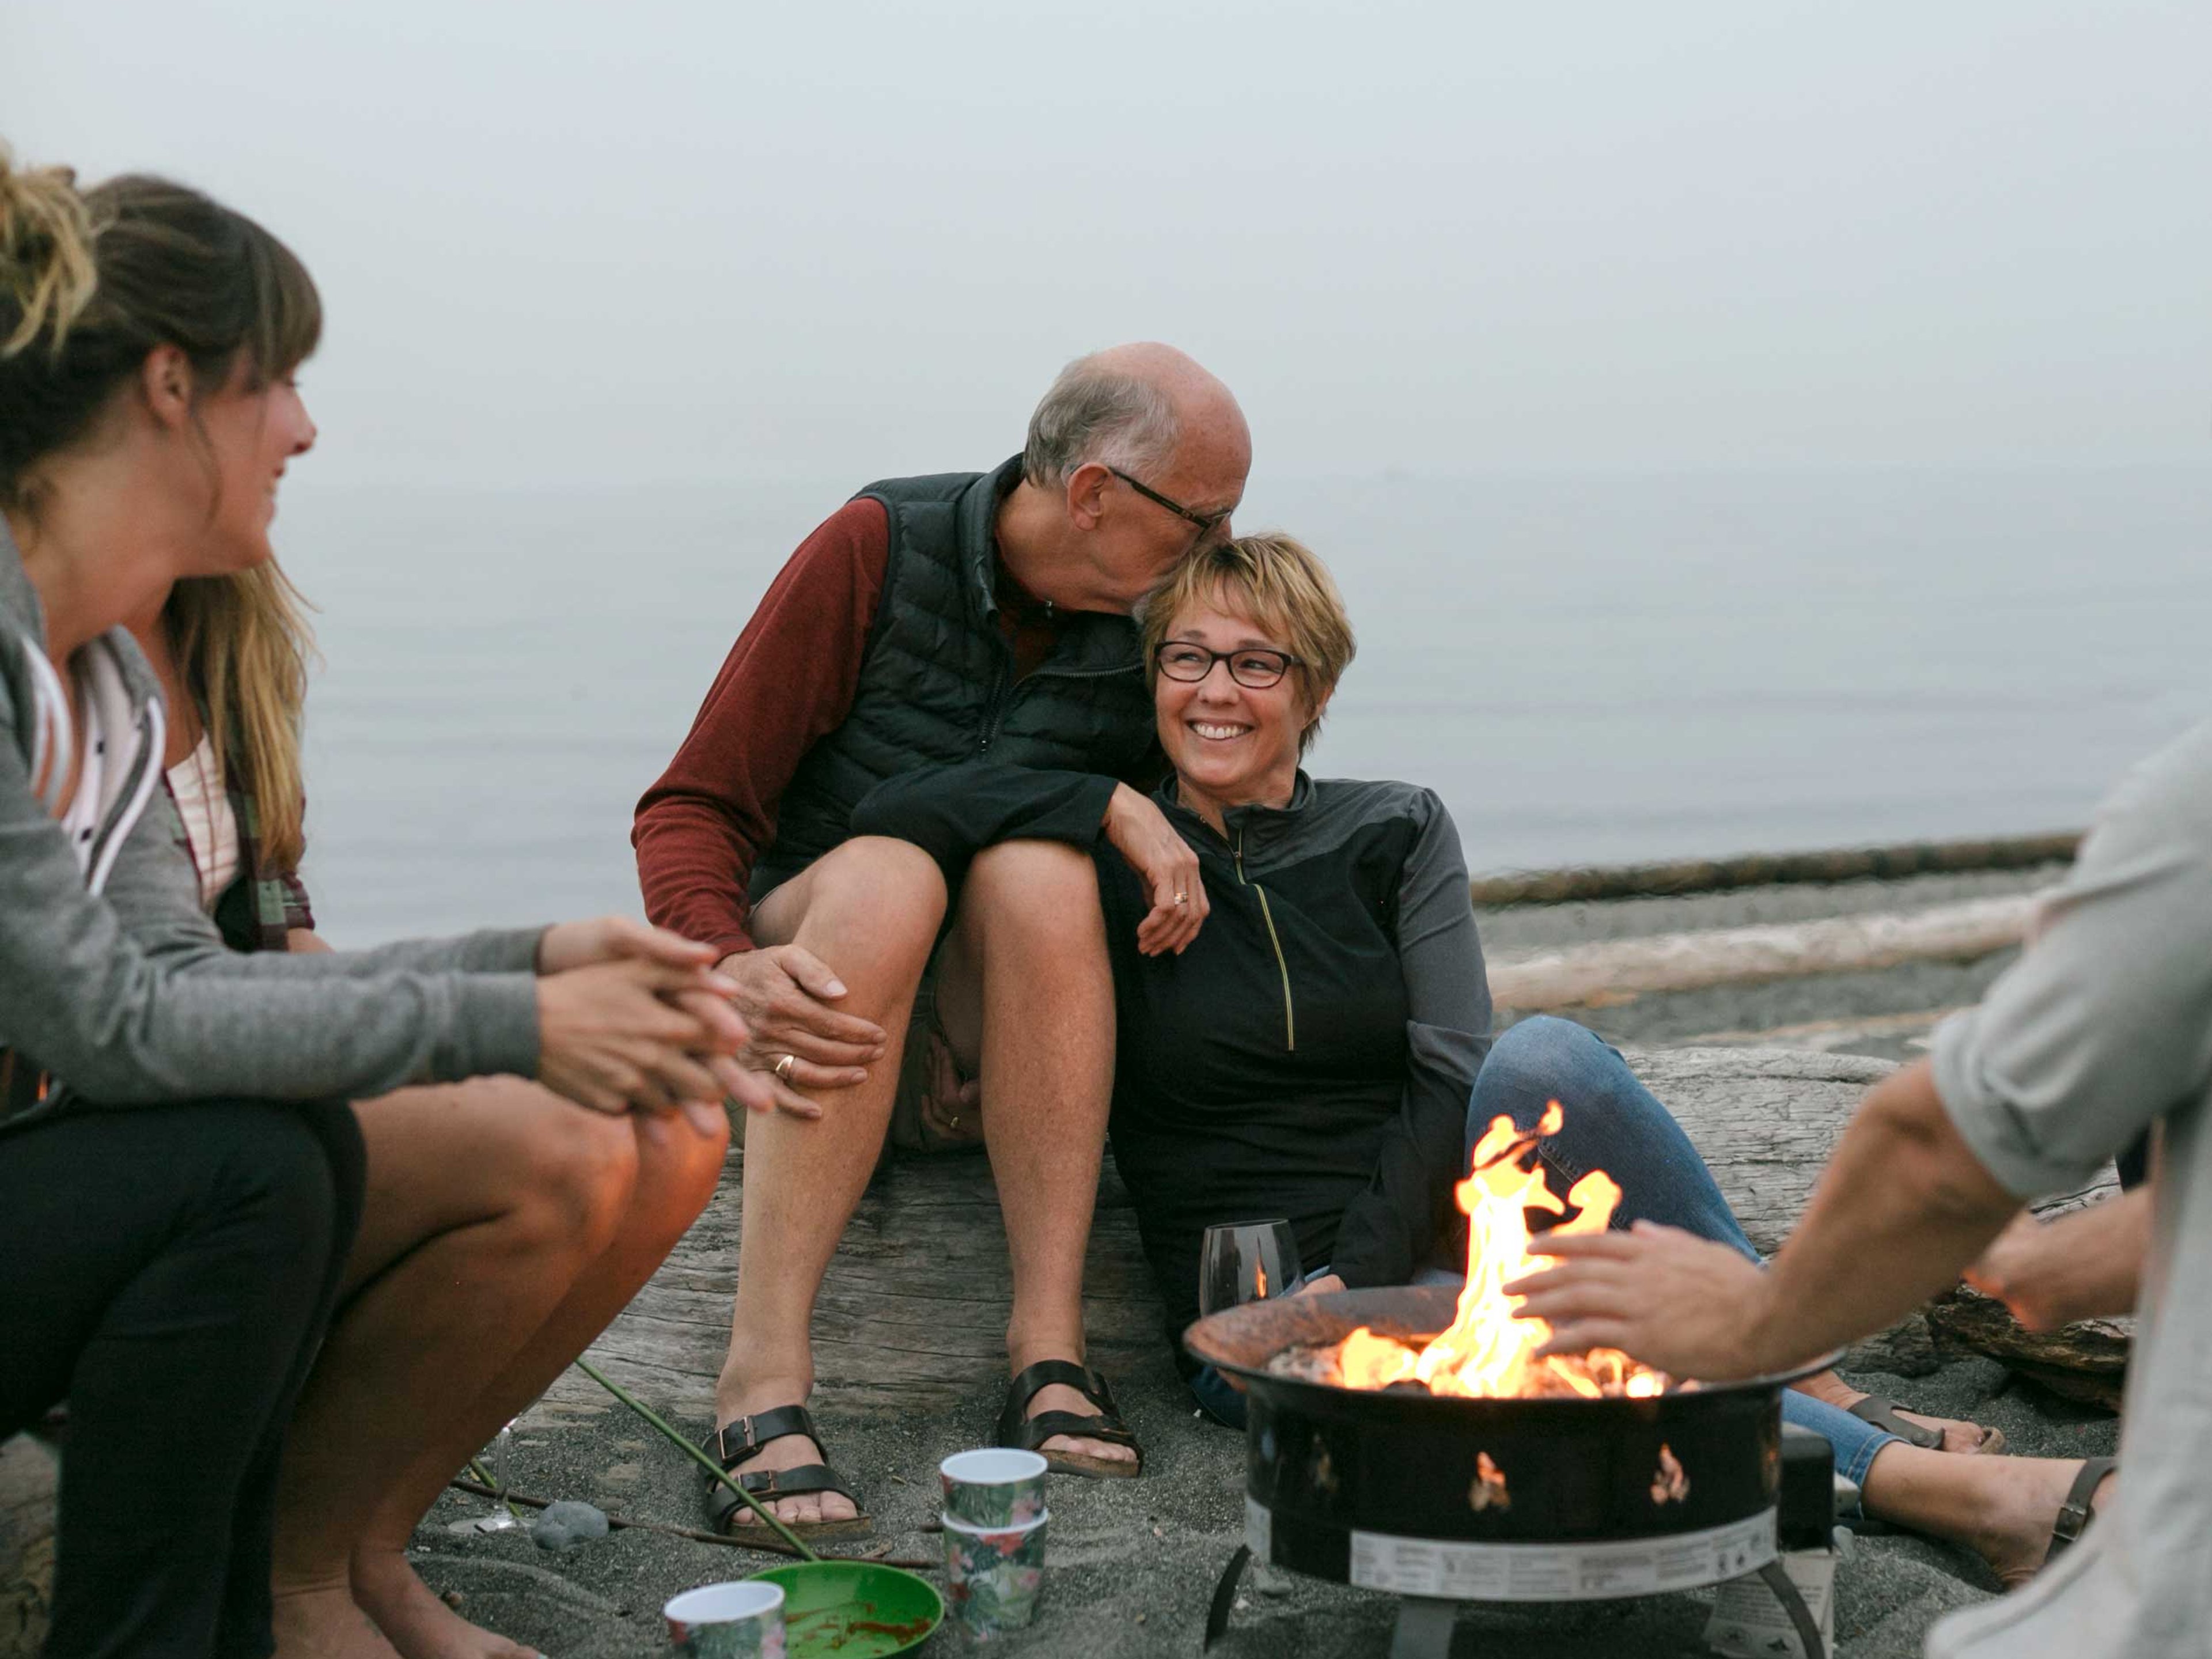 Multi generational family hanging out together around a fire on the beach.